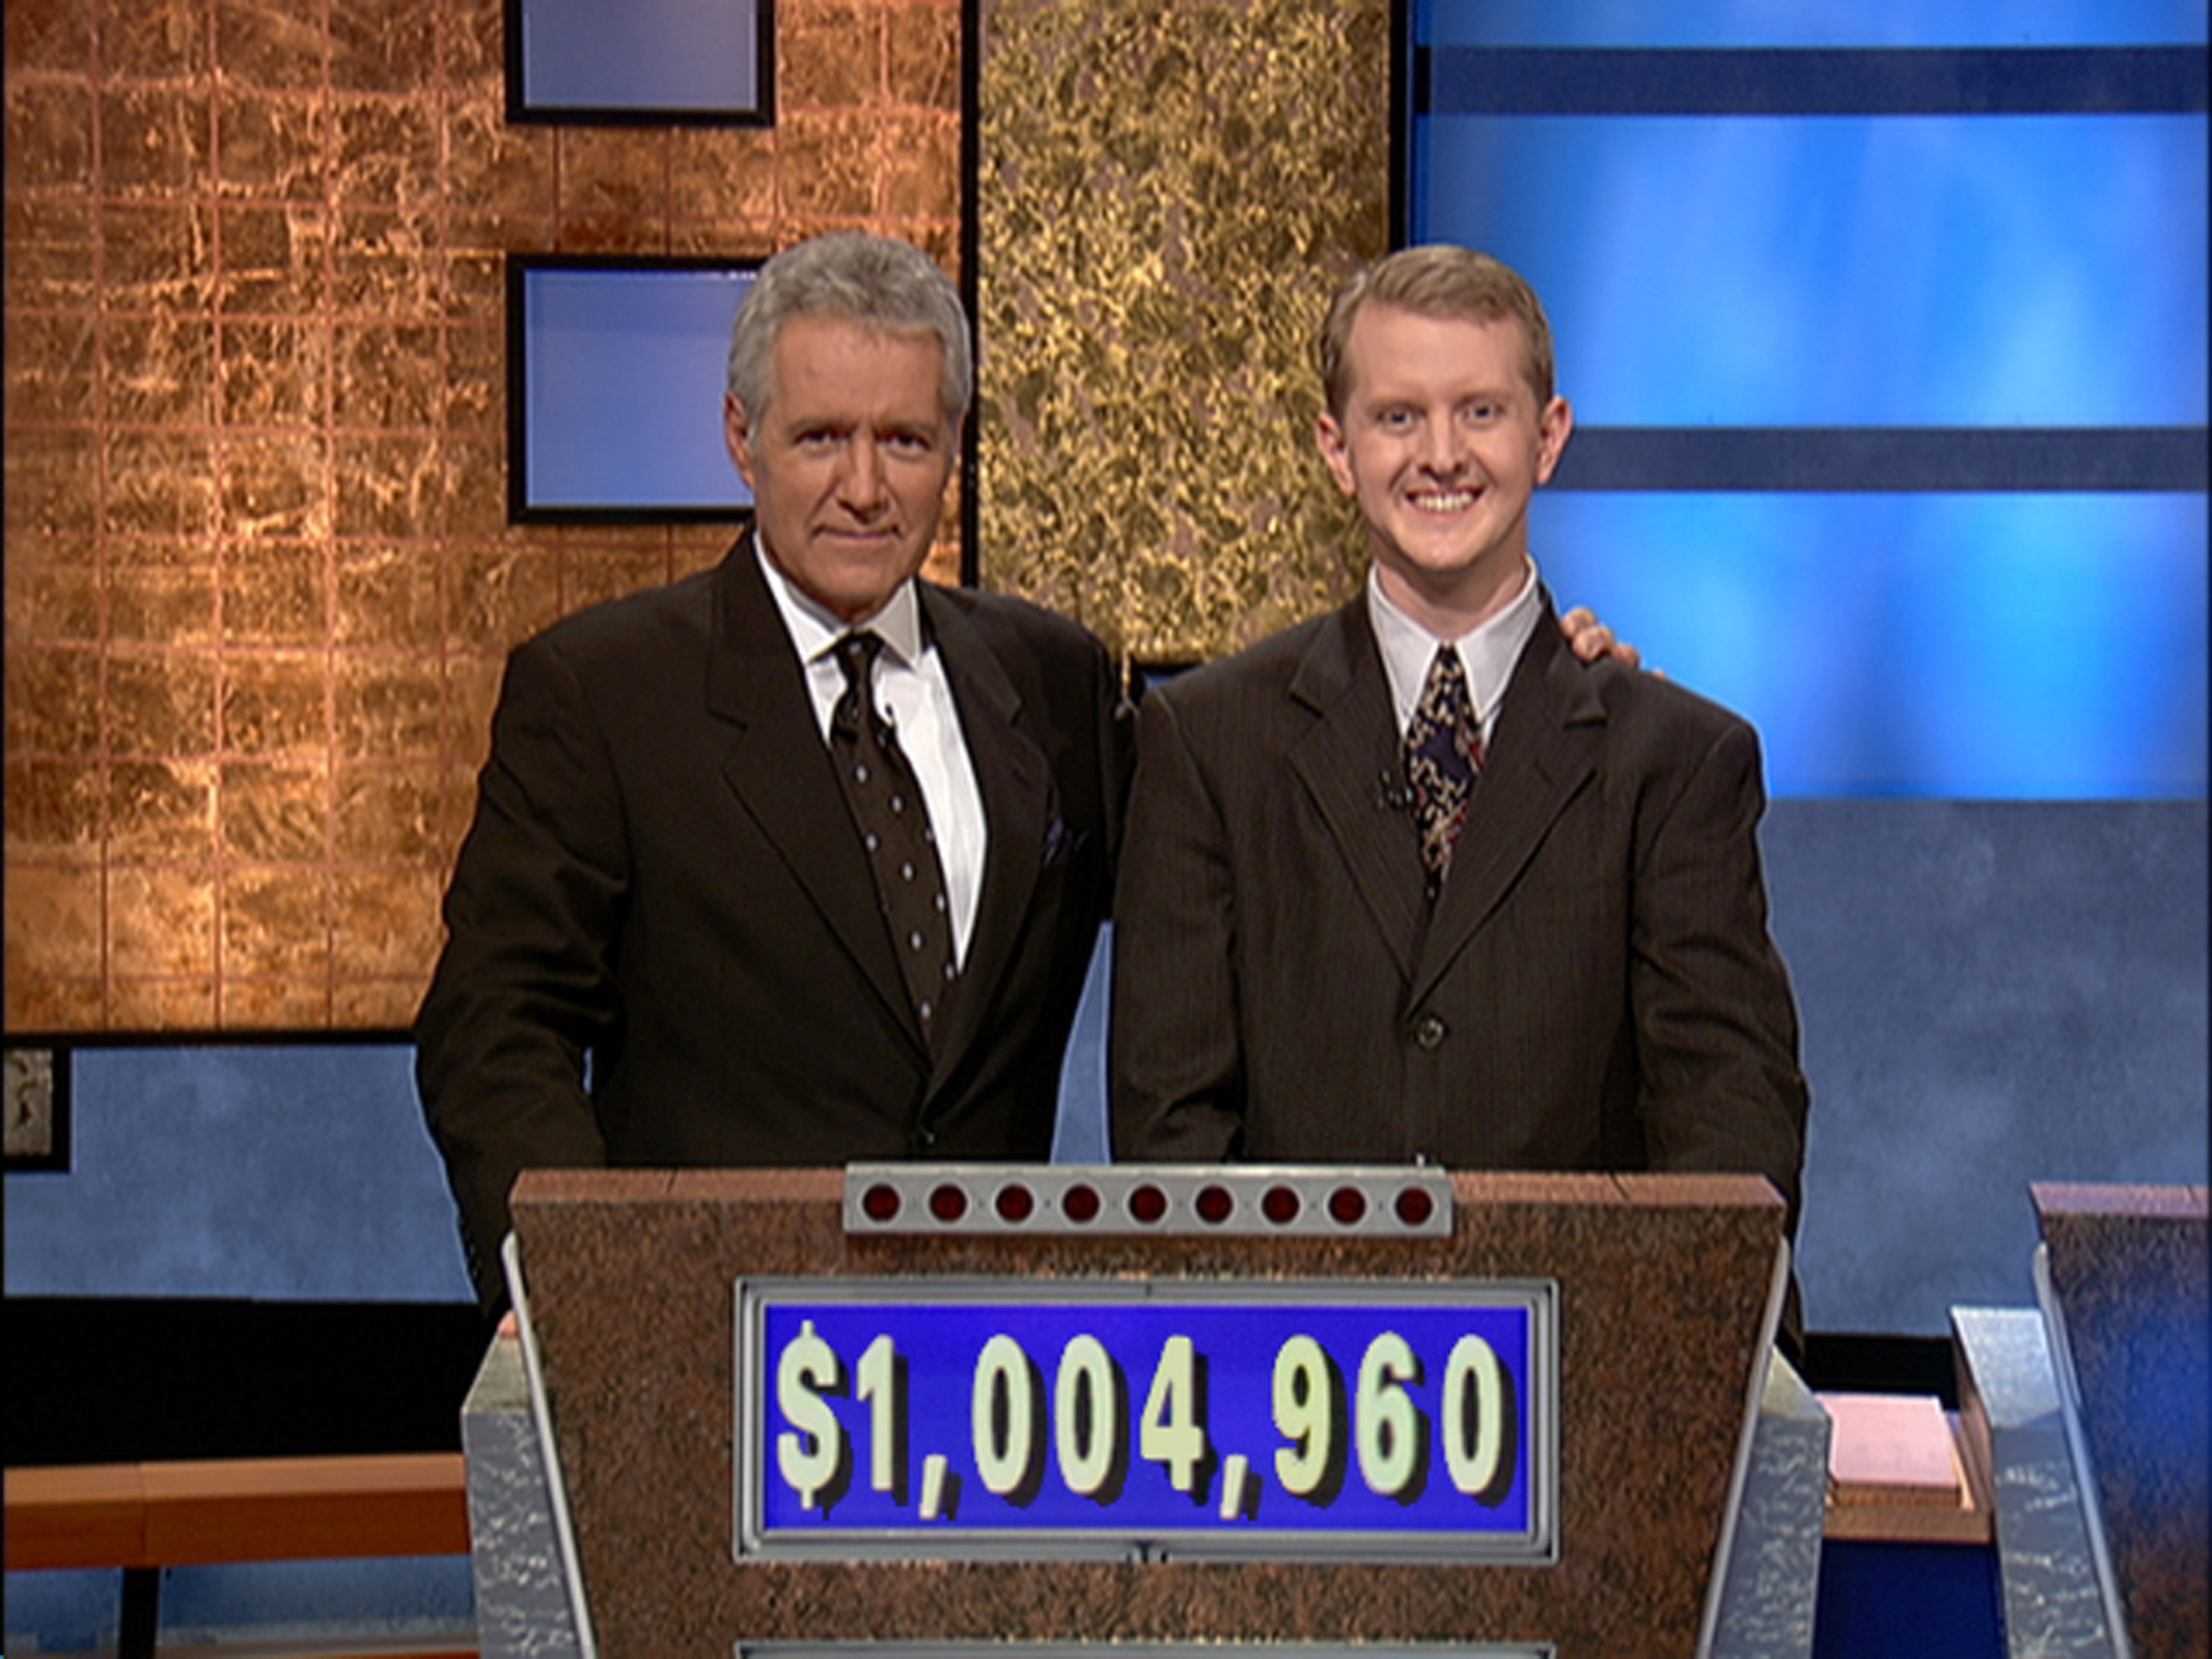 Past and present 'Jeopardy!' hosts Alex Trebek, left, and Ken Jennings, are pictured after Jennings' 74-game record.